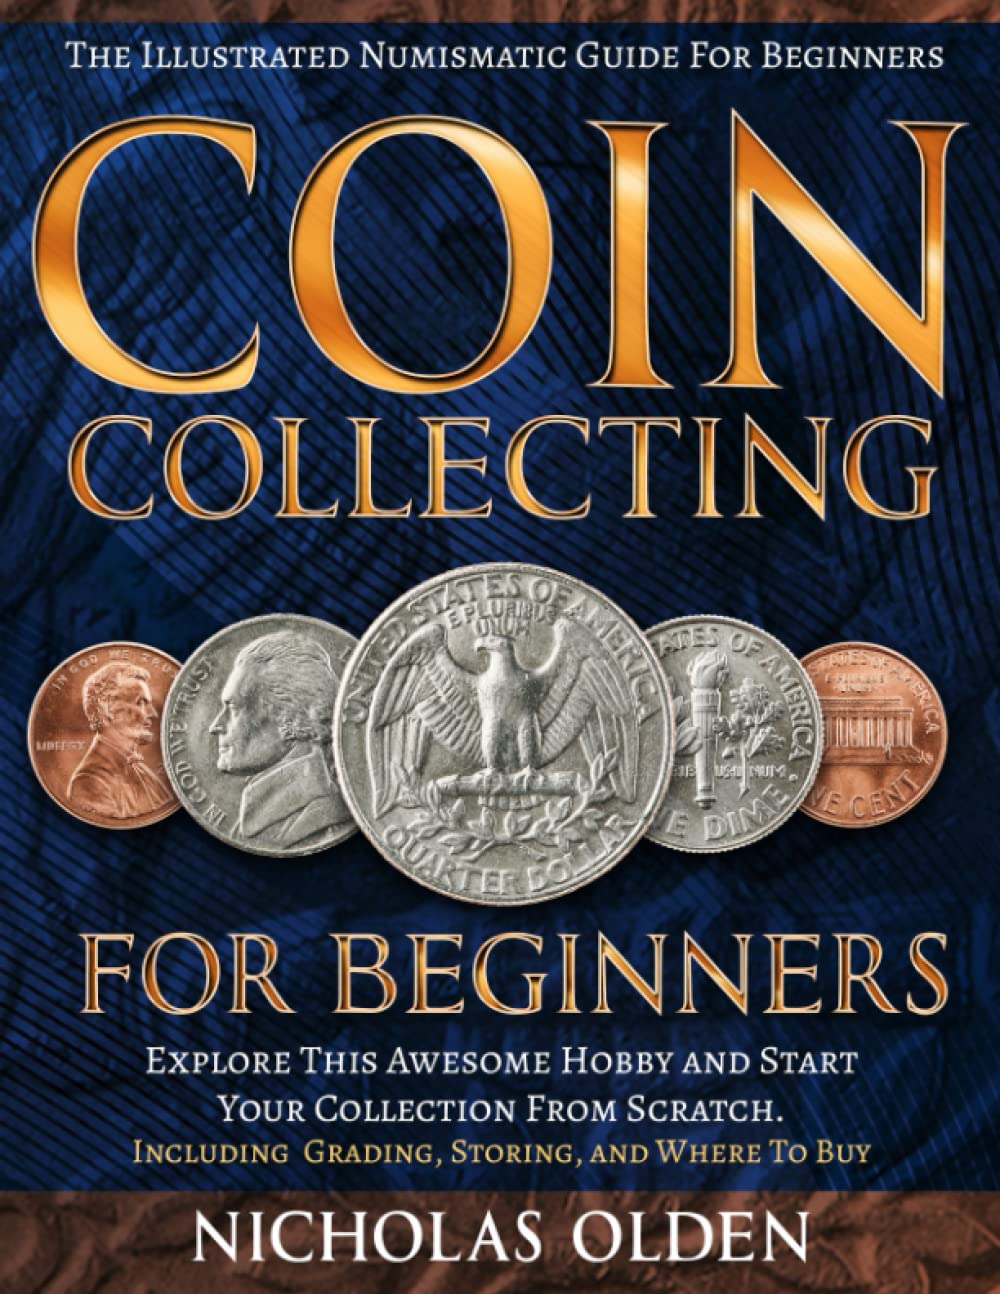 Coin Collecting for Beginners: The Illustrated Numismatic Guide For Beginners. Explore This Awesome Hobby and Start Your Collection From Scratch. | Including Grading, Storing, and Where To Buy